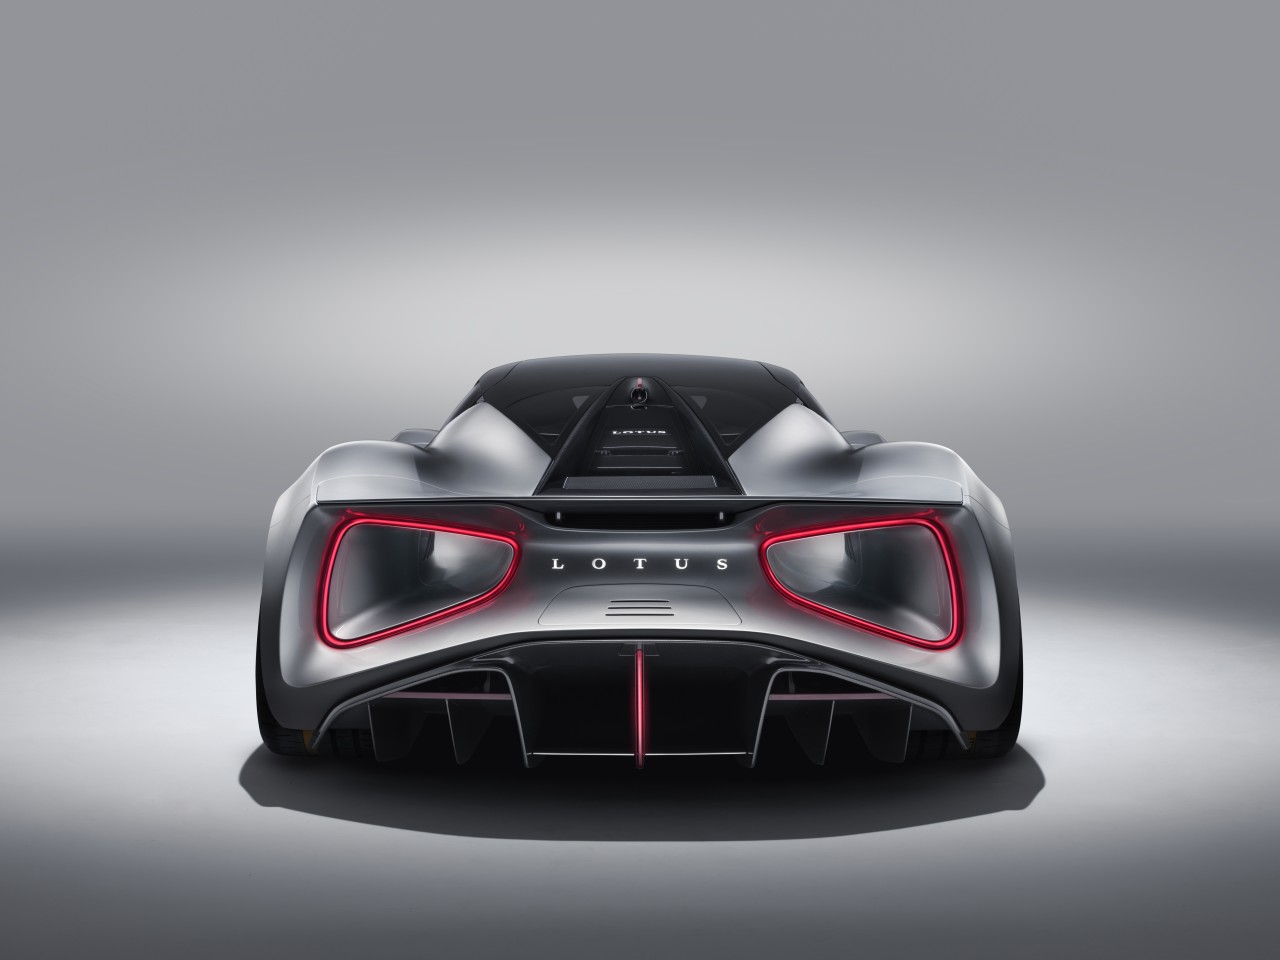 On  the Lotus Evija giant venturi tunnels exit at the rear, rimmed by the taillights